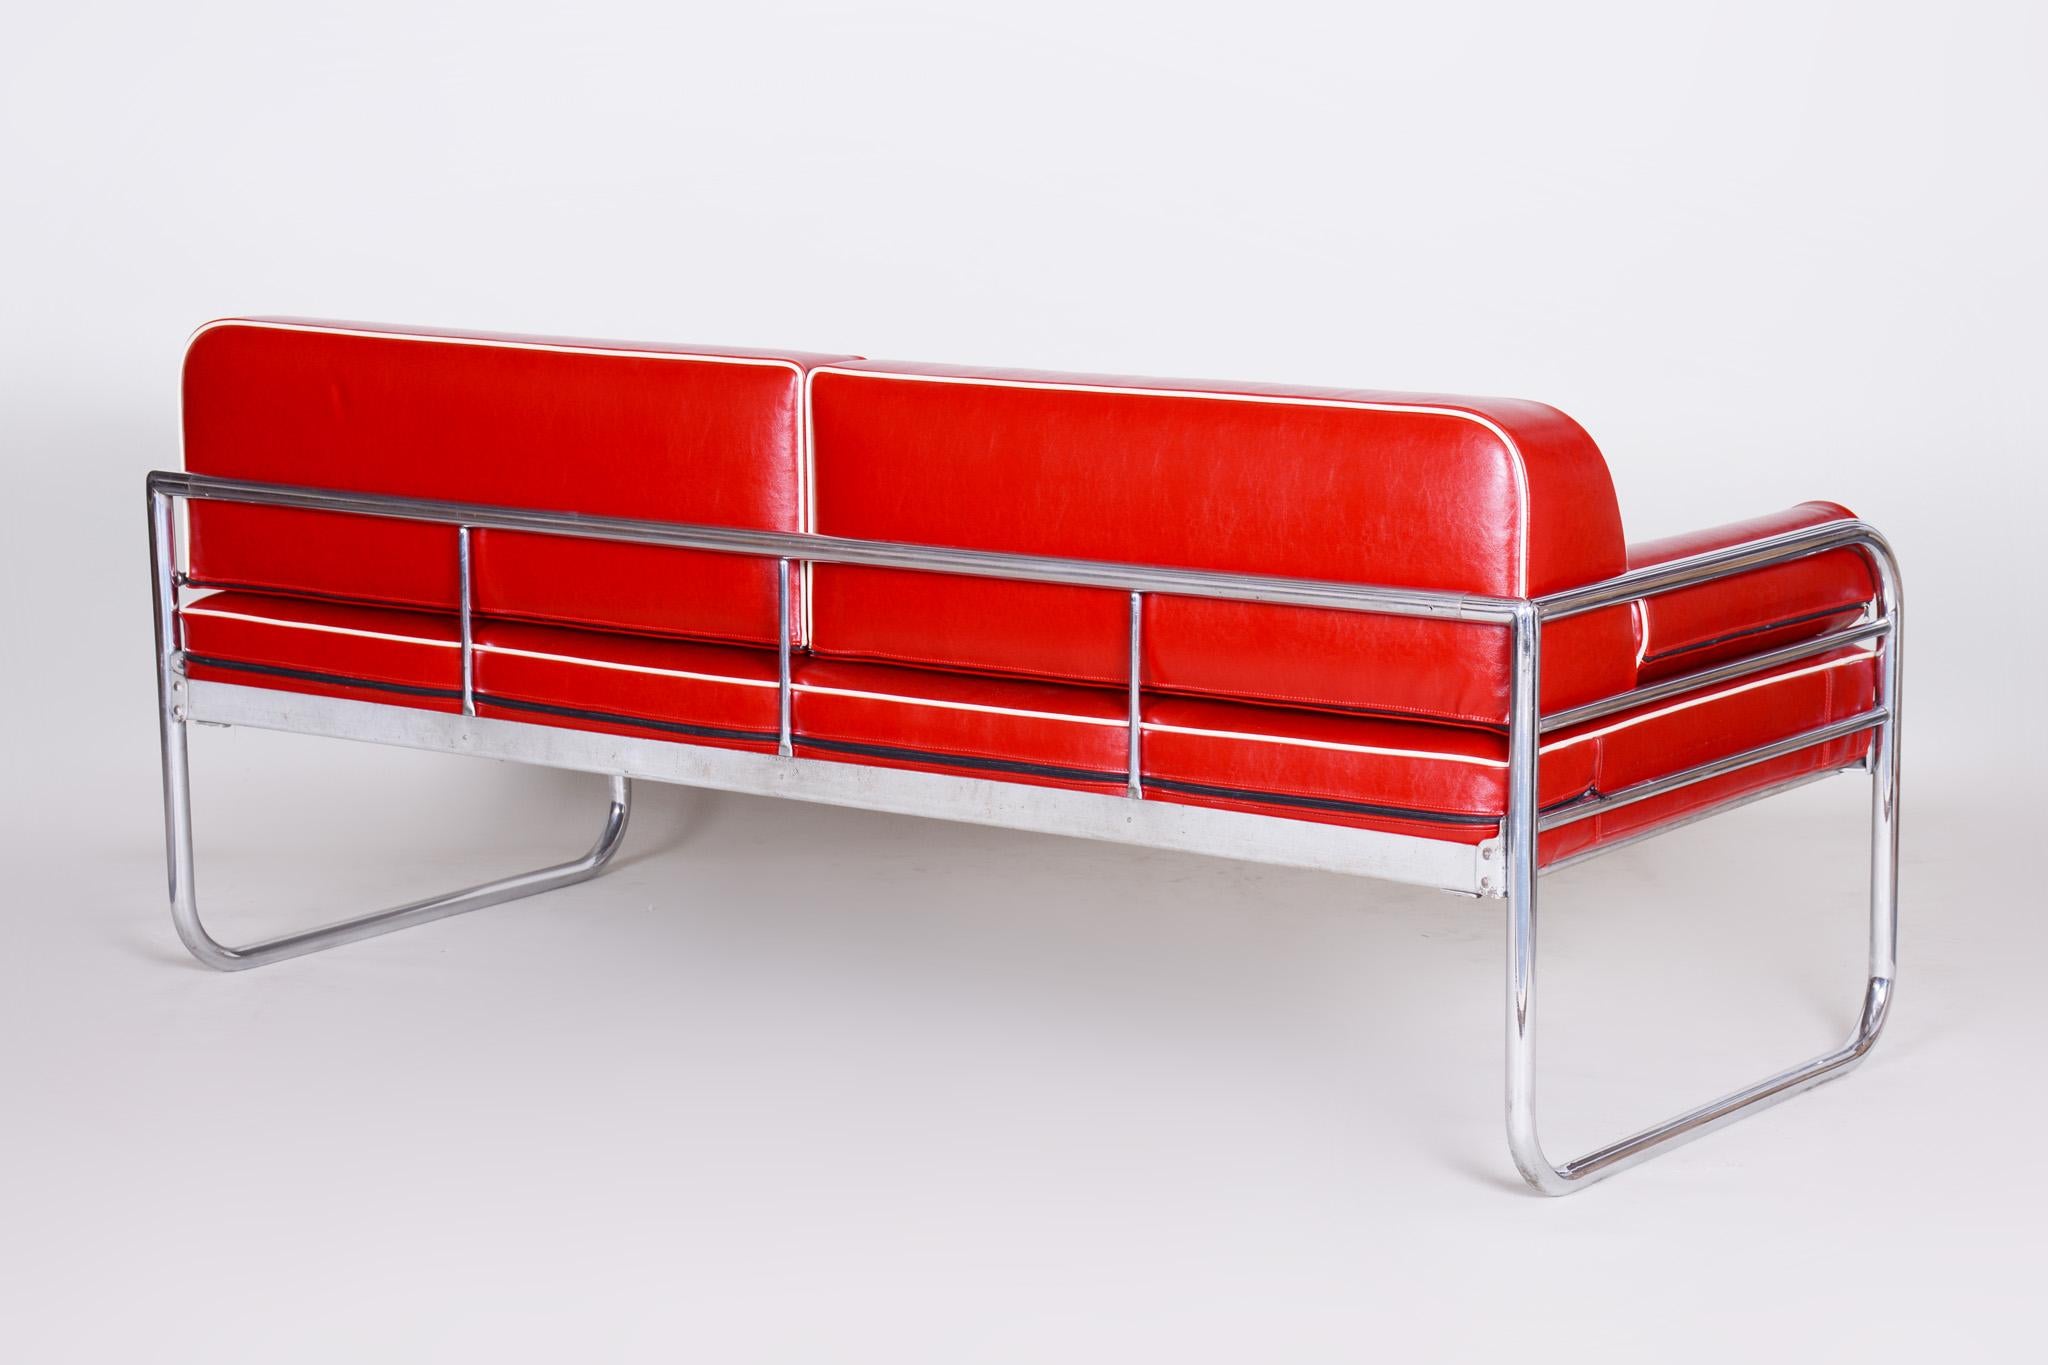 Czech Bauhaus Red Tubular Chrome Sofa by Hynek Gottwald, New Upholstery, 1930s In Good Condition For Sale In Horomerice, CZ